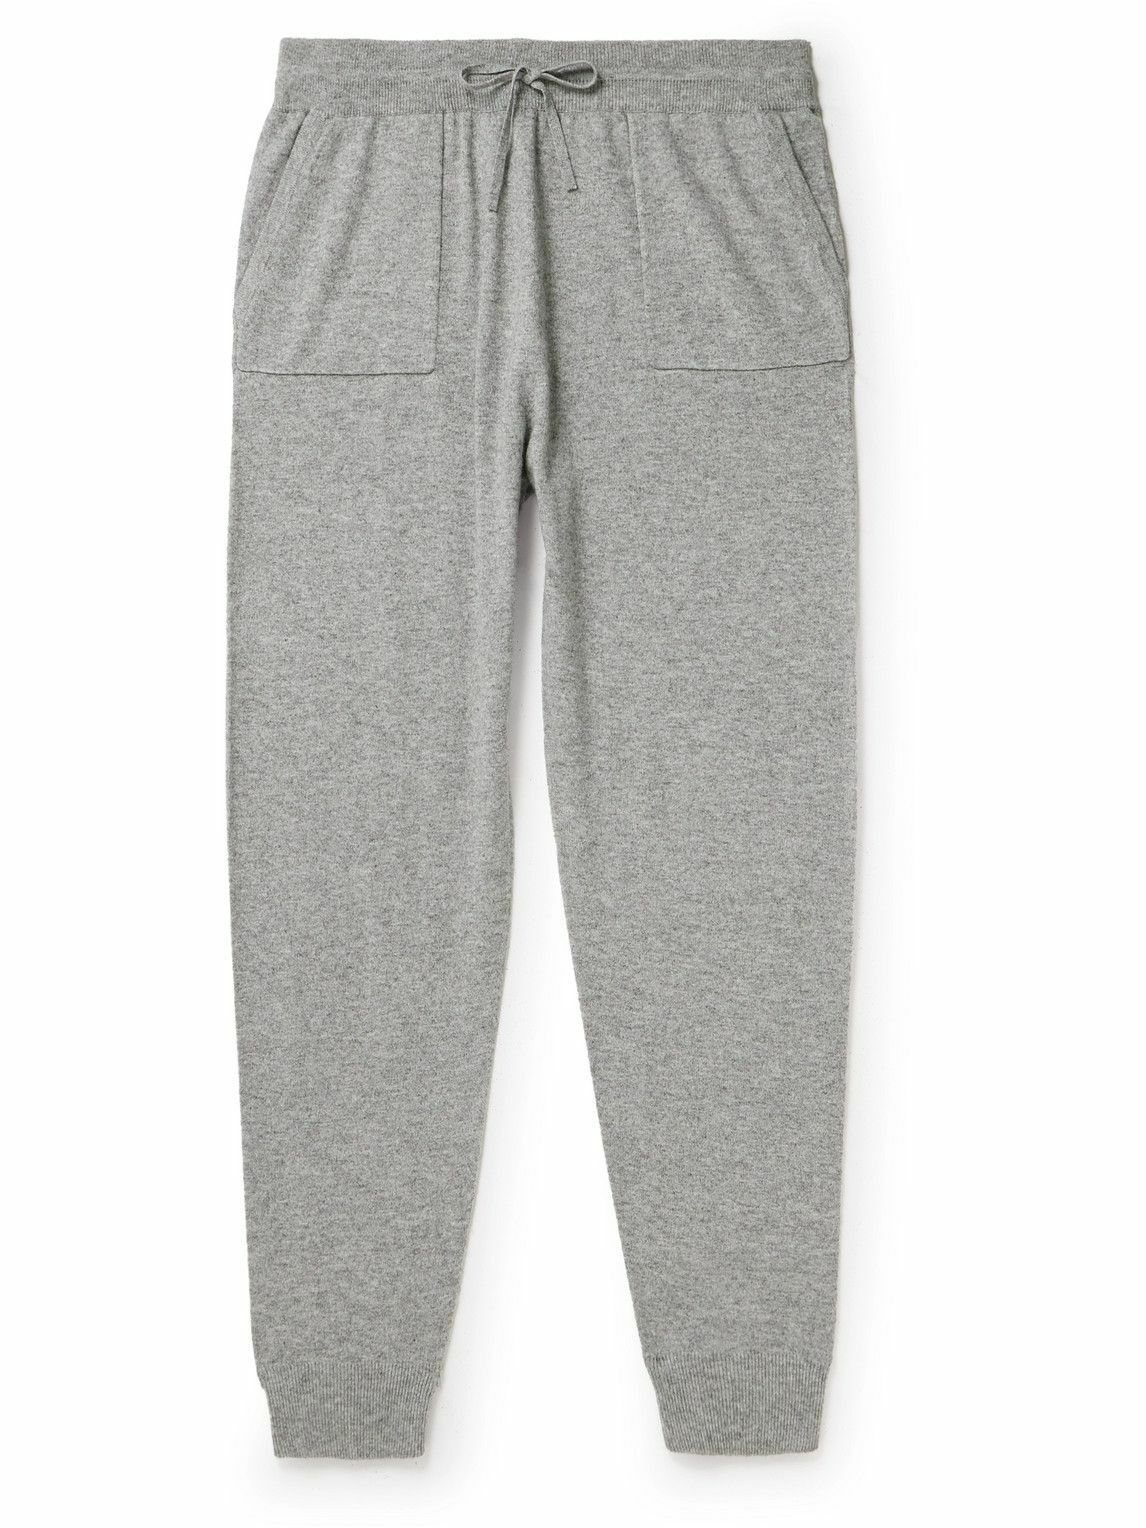 Mr P. - Wool and Cashmere-Blend Sweatpants - Gray Mr P.